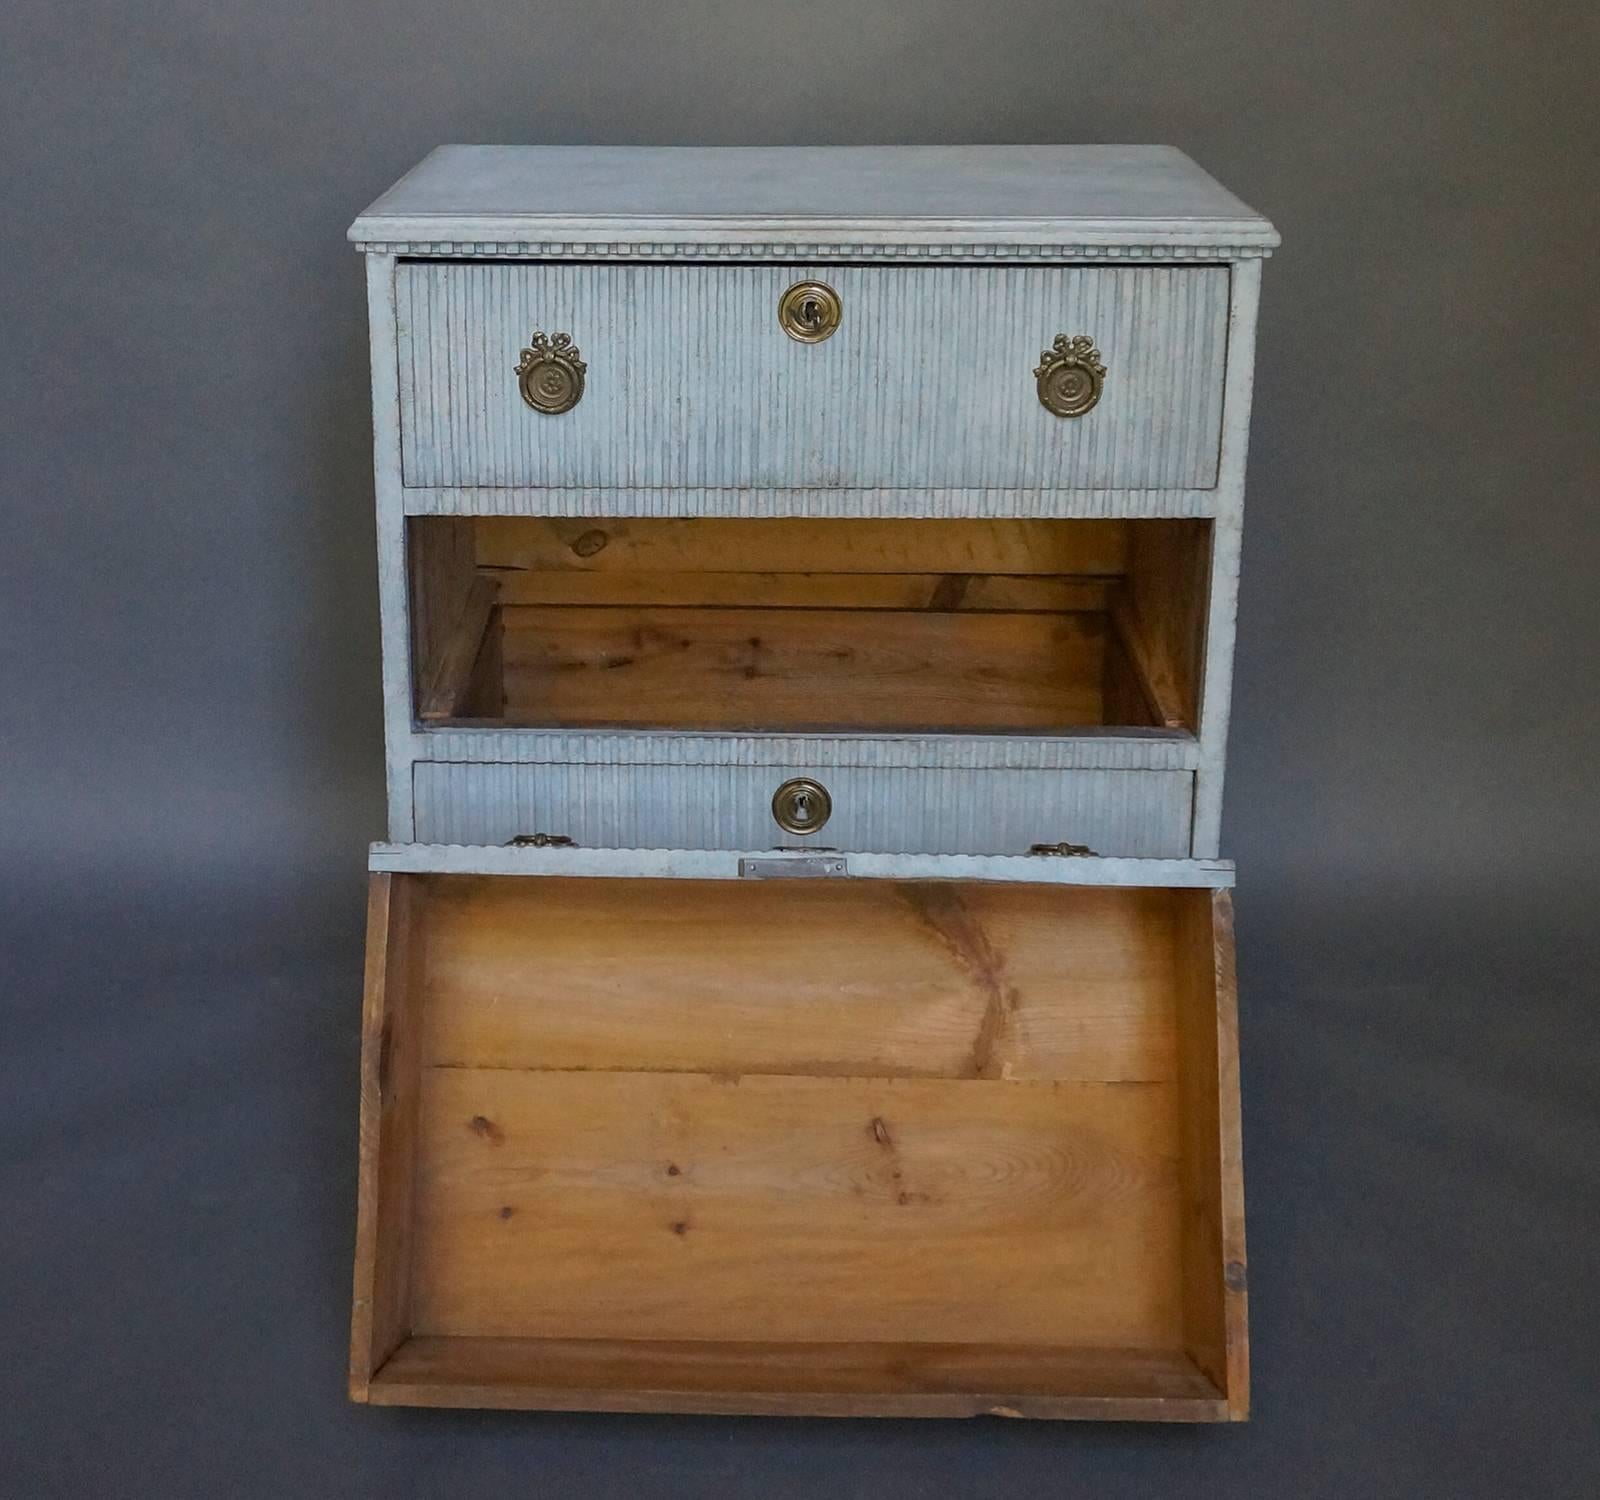 Three-drawer chest, Sweden, circa 1870, in the Gustavian style. Dentil molding under the top and reeding on the drawer fronts which is carried onto the frame. Brass hardware and tapering square feet.